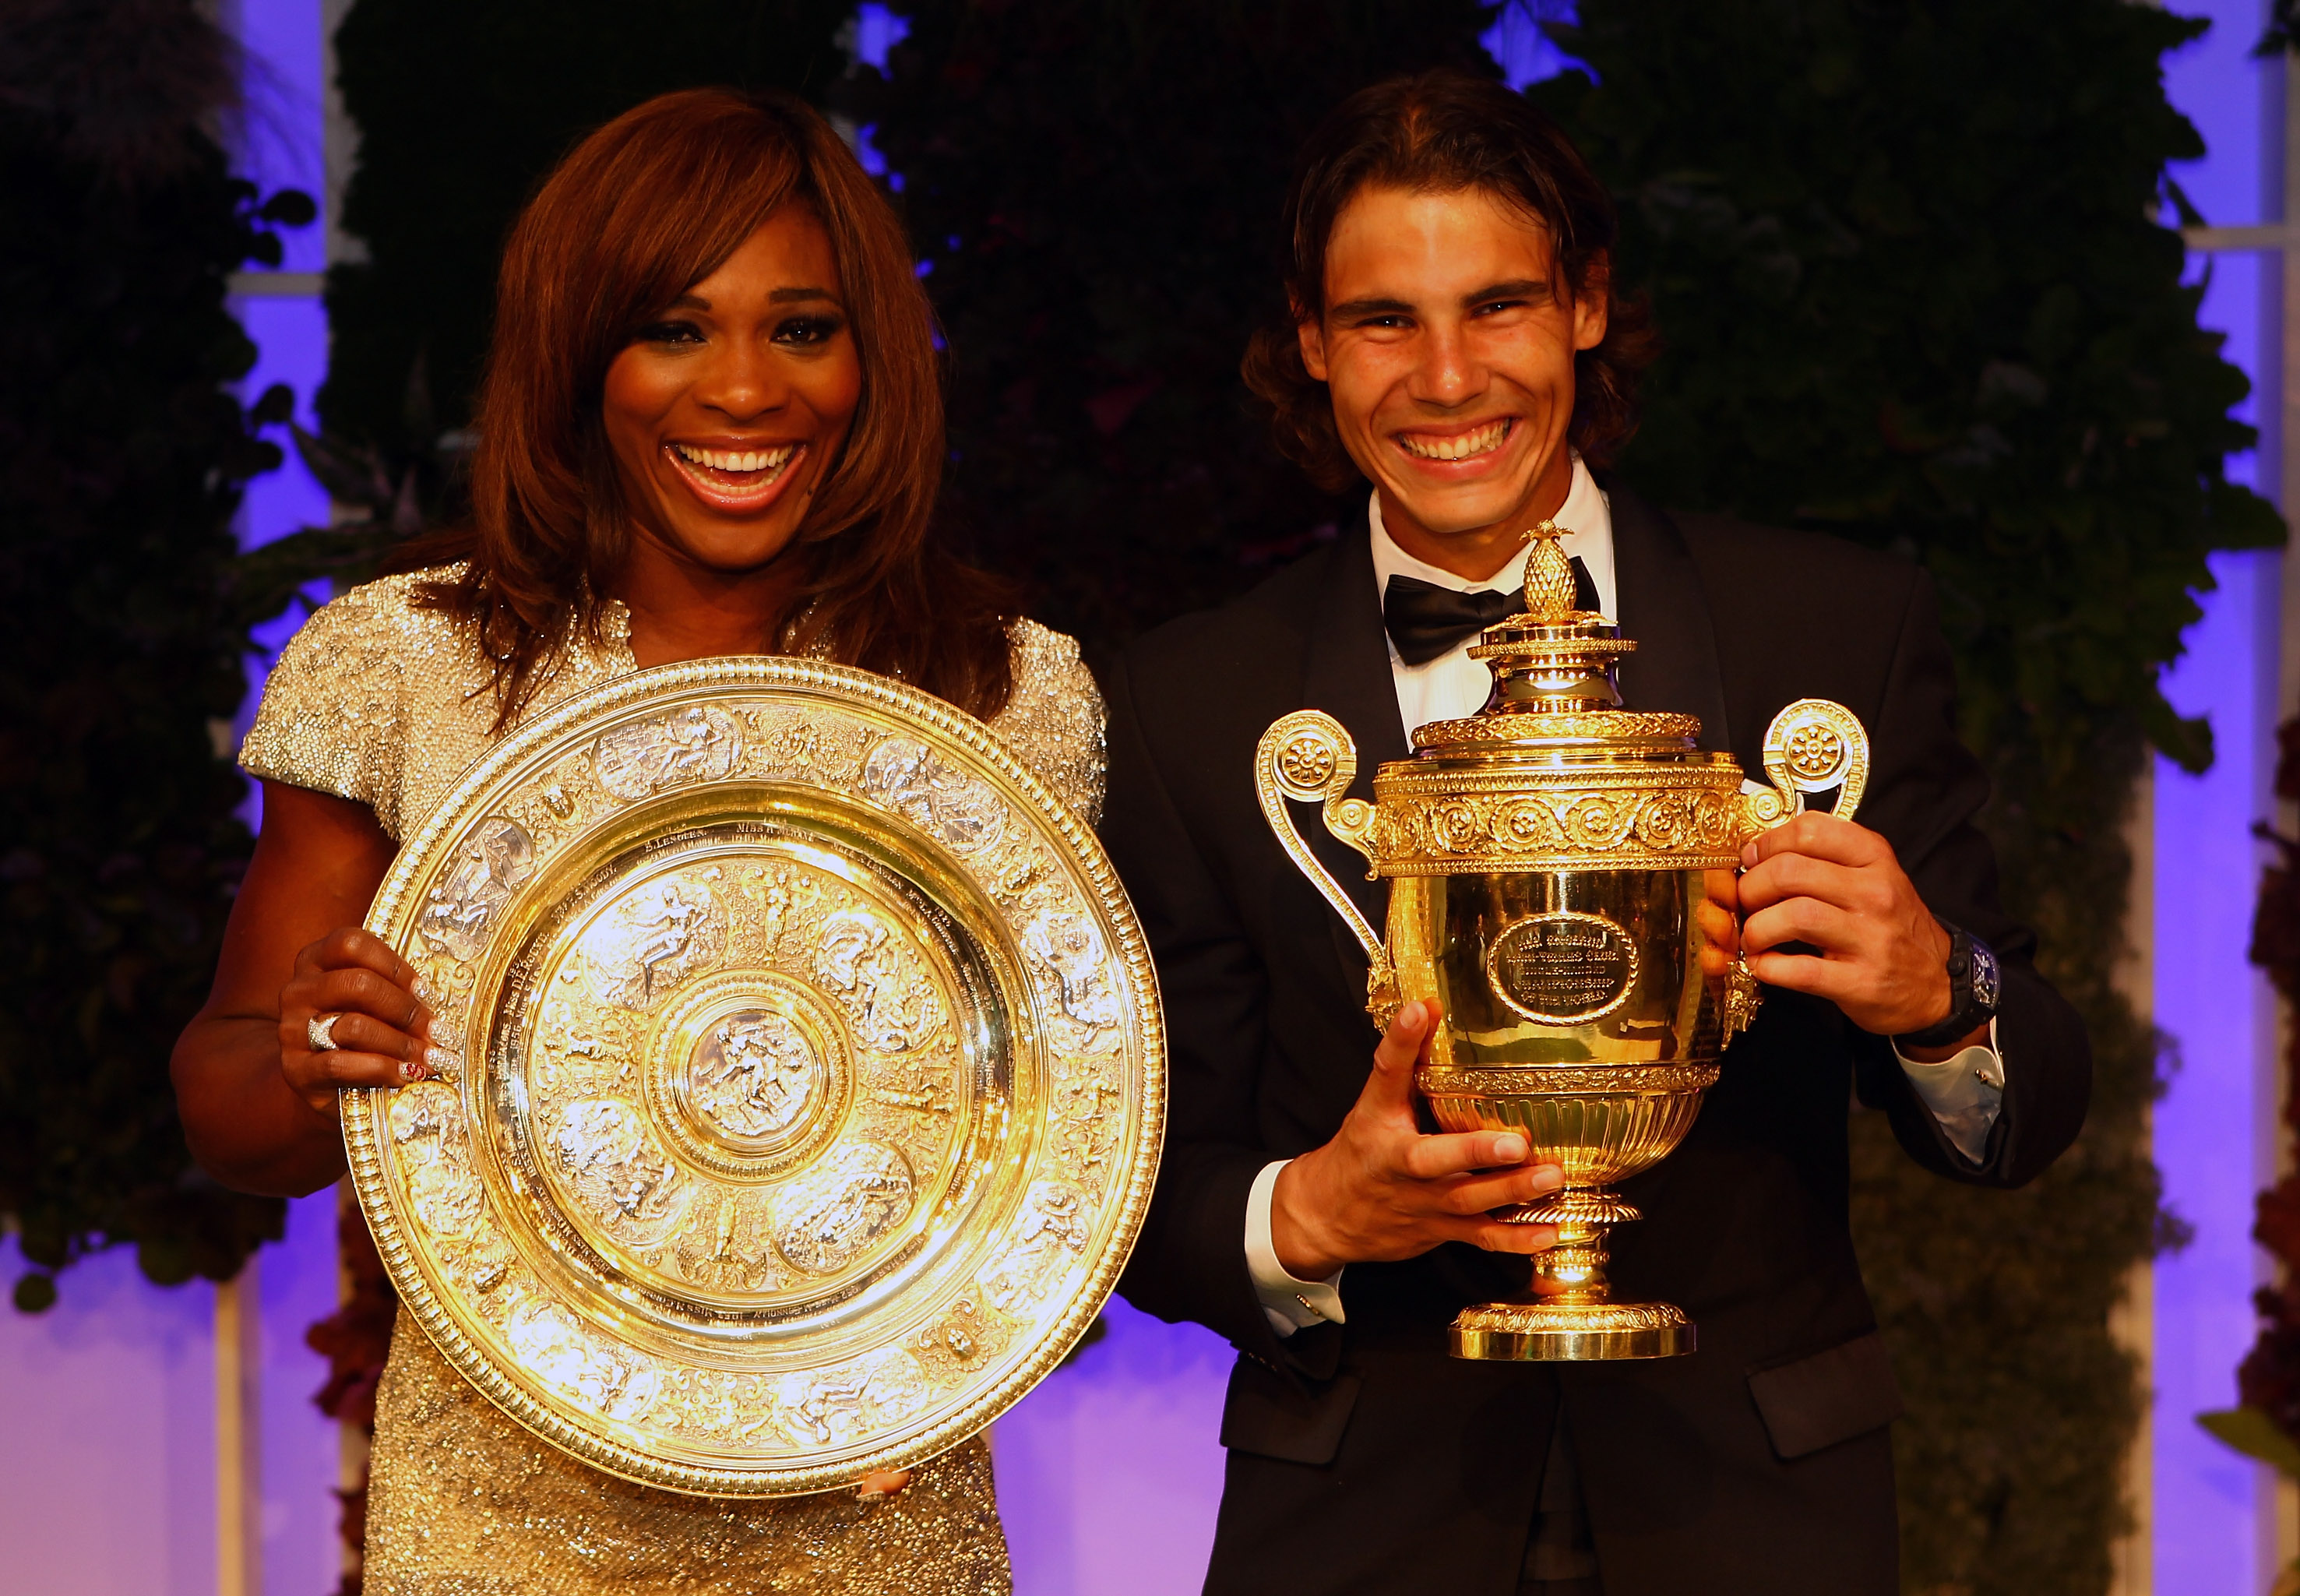 LONDON, ENGLAND - JULY 04:  Serena Williams of USA and Rafael Nadal of Spain with their winners trophies at the Wimbledon Championships 2010 Winners Ball at the InterContinental Park Lane Hotel on July 4, 2010 in London, England.  (Photo by Julian Finney/